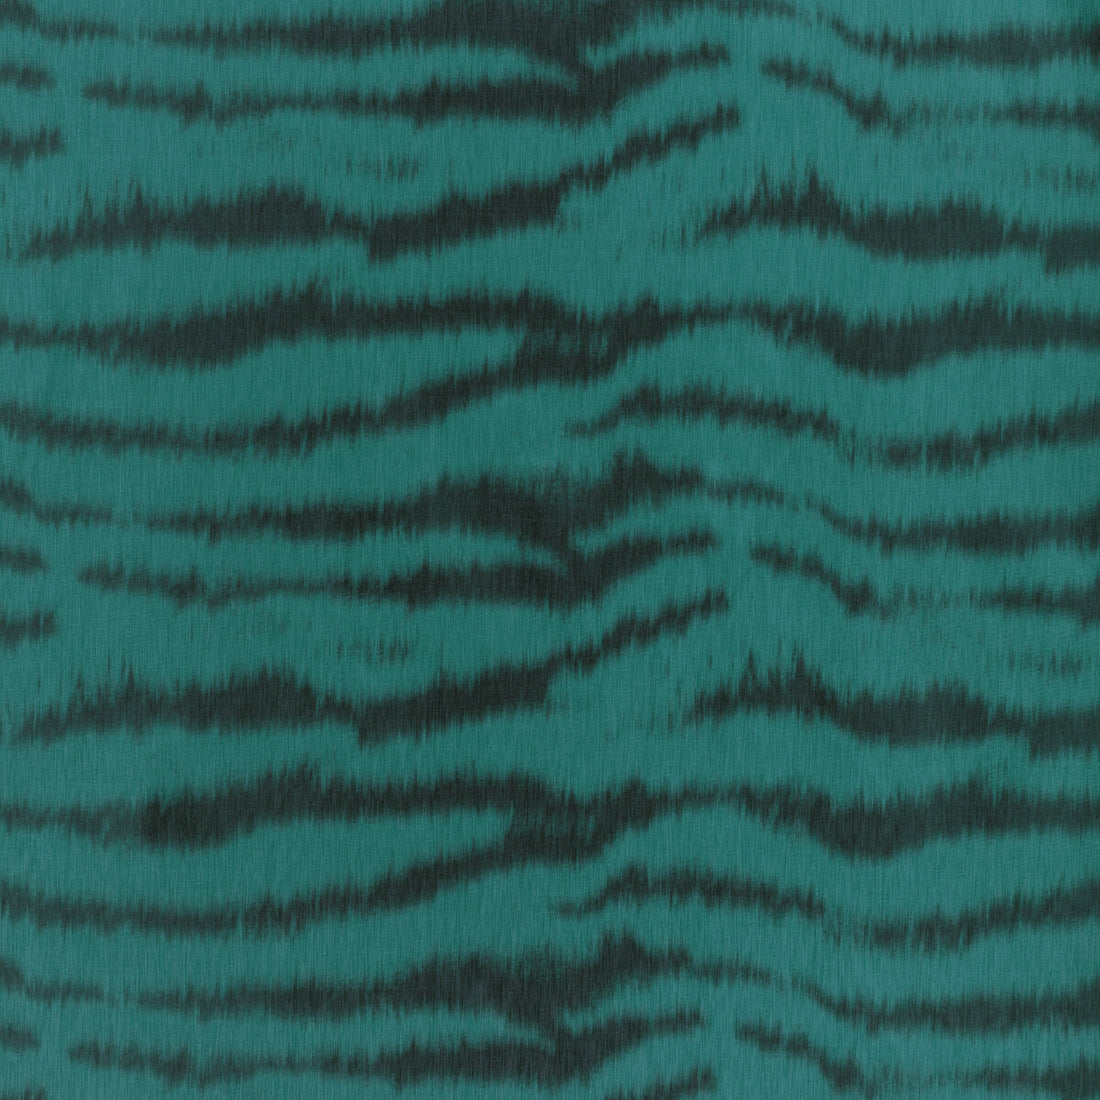 Tigre Warp Print fabric in teal color - pattern 8023137.13.0 - by Brunschwig &amp; Fils in the Celeste collection